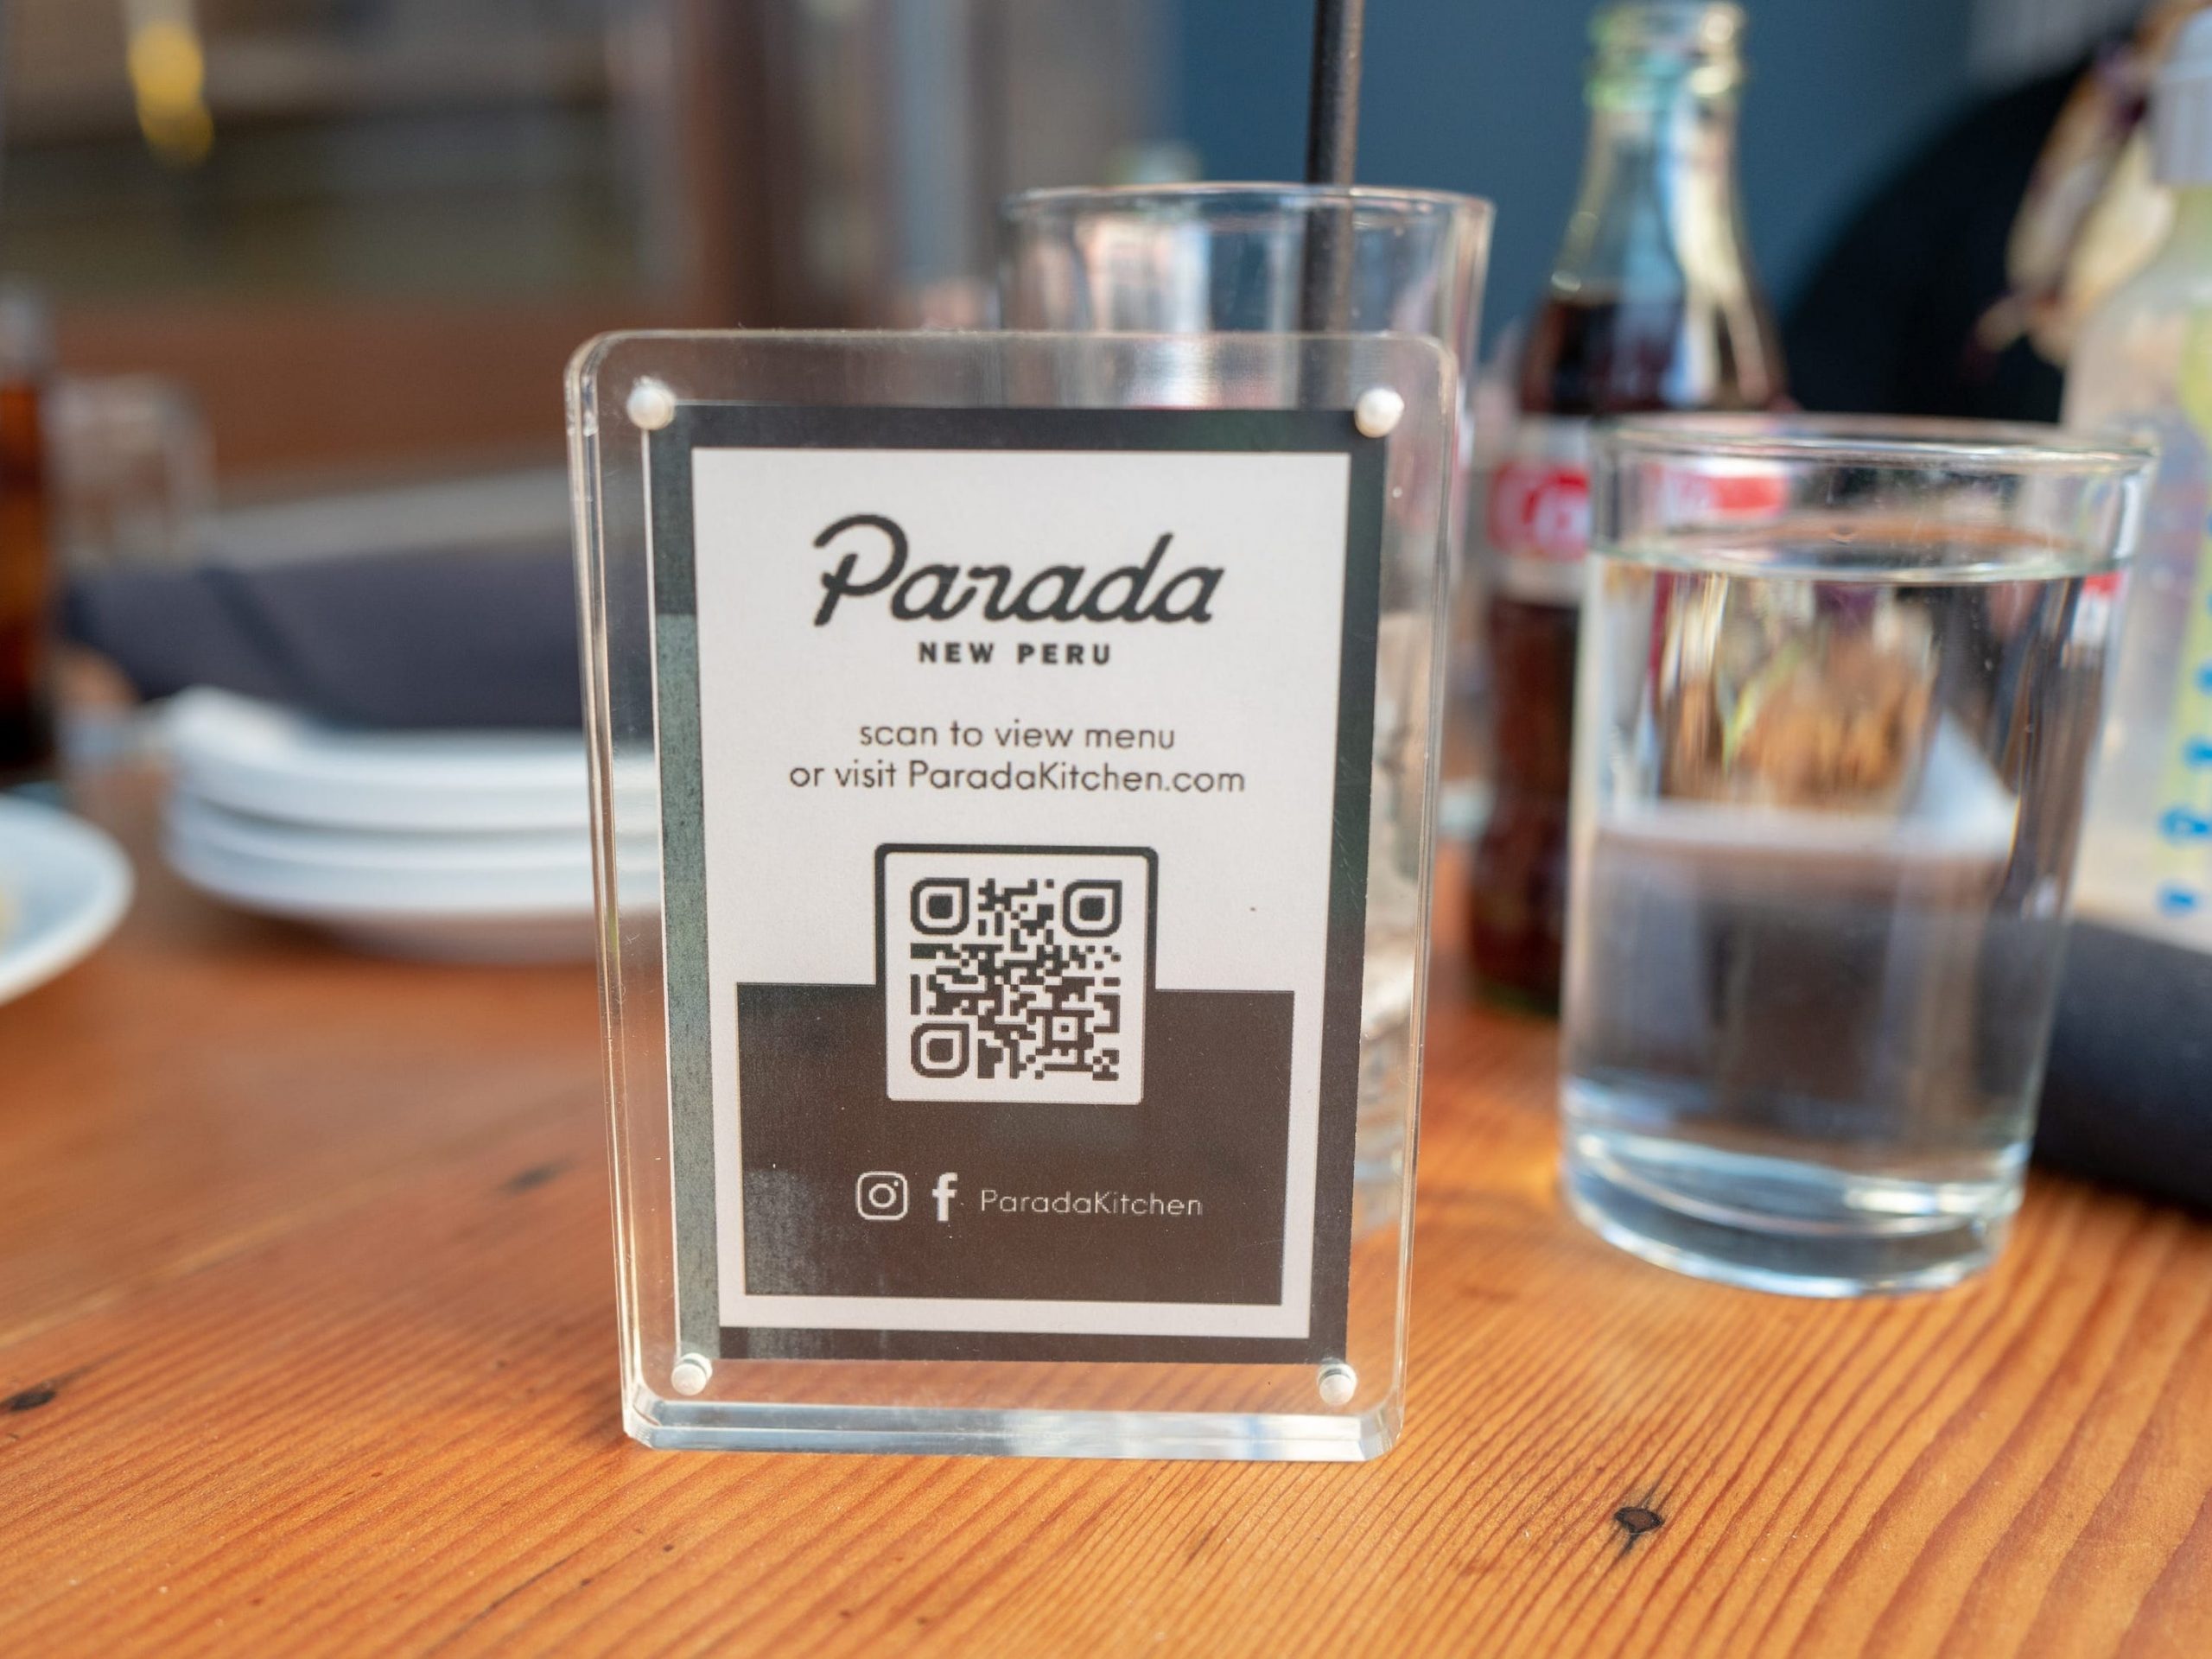 Close-up shot of a tabletop sign holder with a sign reading "Parada, New Peru" with a QR code visible at the Parada Kitchen Peruvian Restaurant in Walnut Creek, California, February, 2021